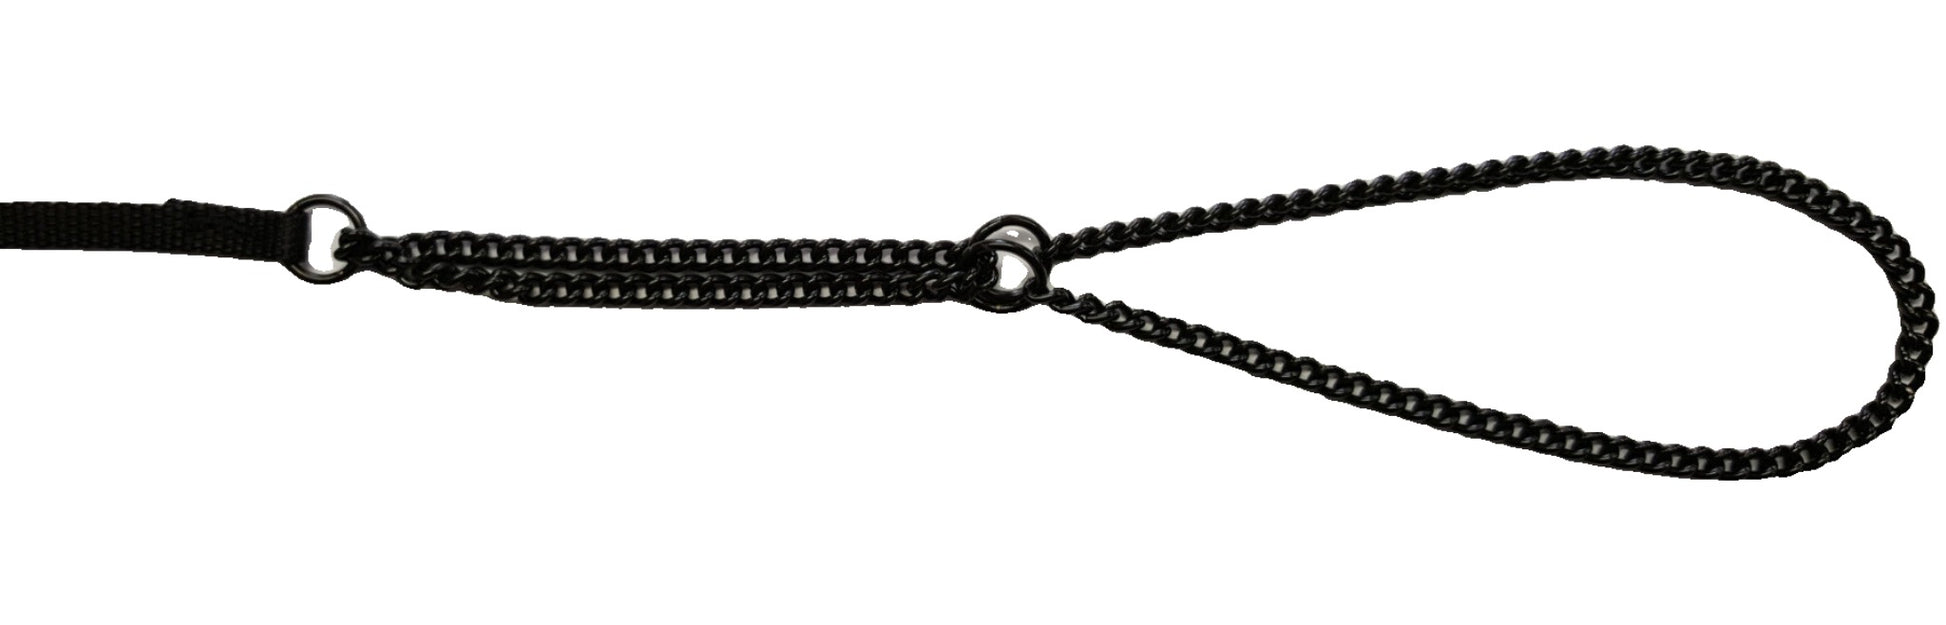 English Black Chain Martingale with Flat Nylon Lead - Assorted Sizes